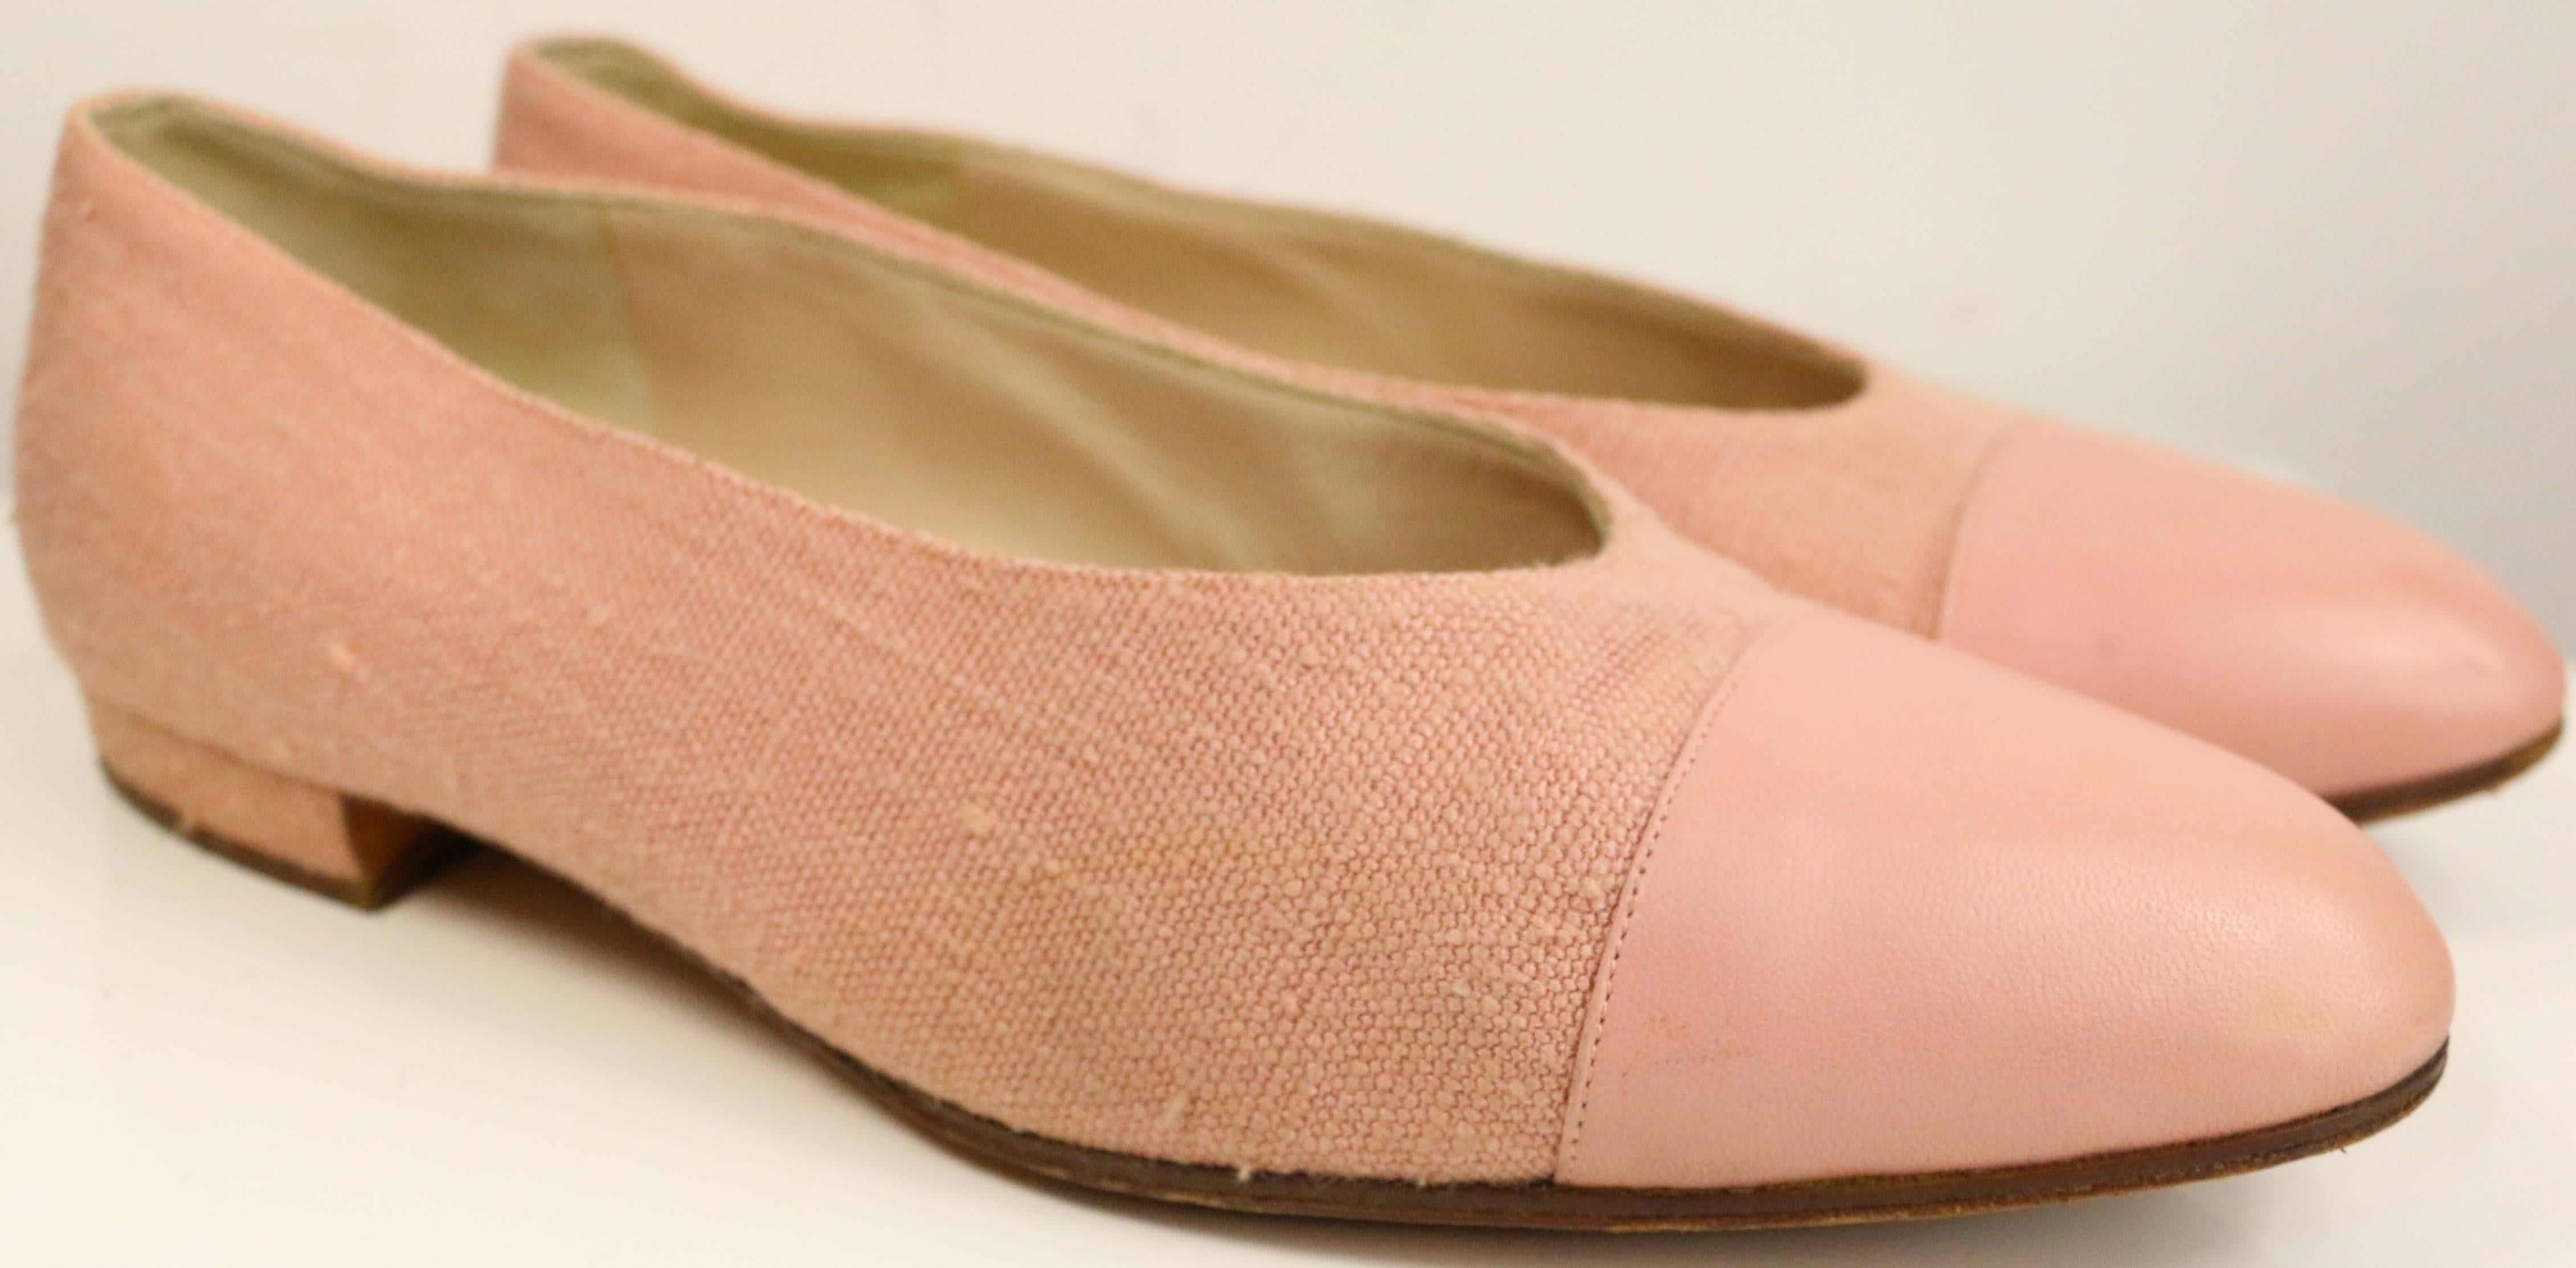 - Vintage 90s Chanel pink tweed leather cap ballerina flats. 

- Size 37.5. 

- Made in Italy. 
